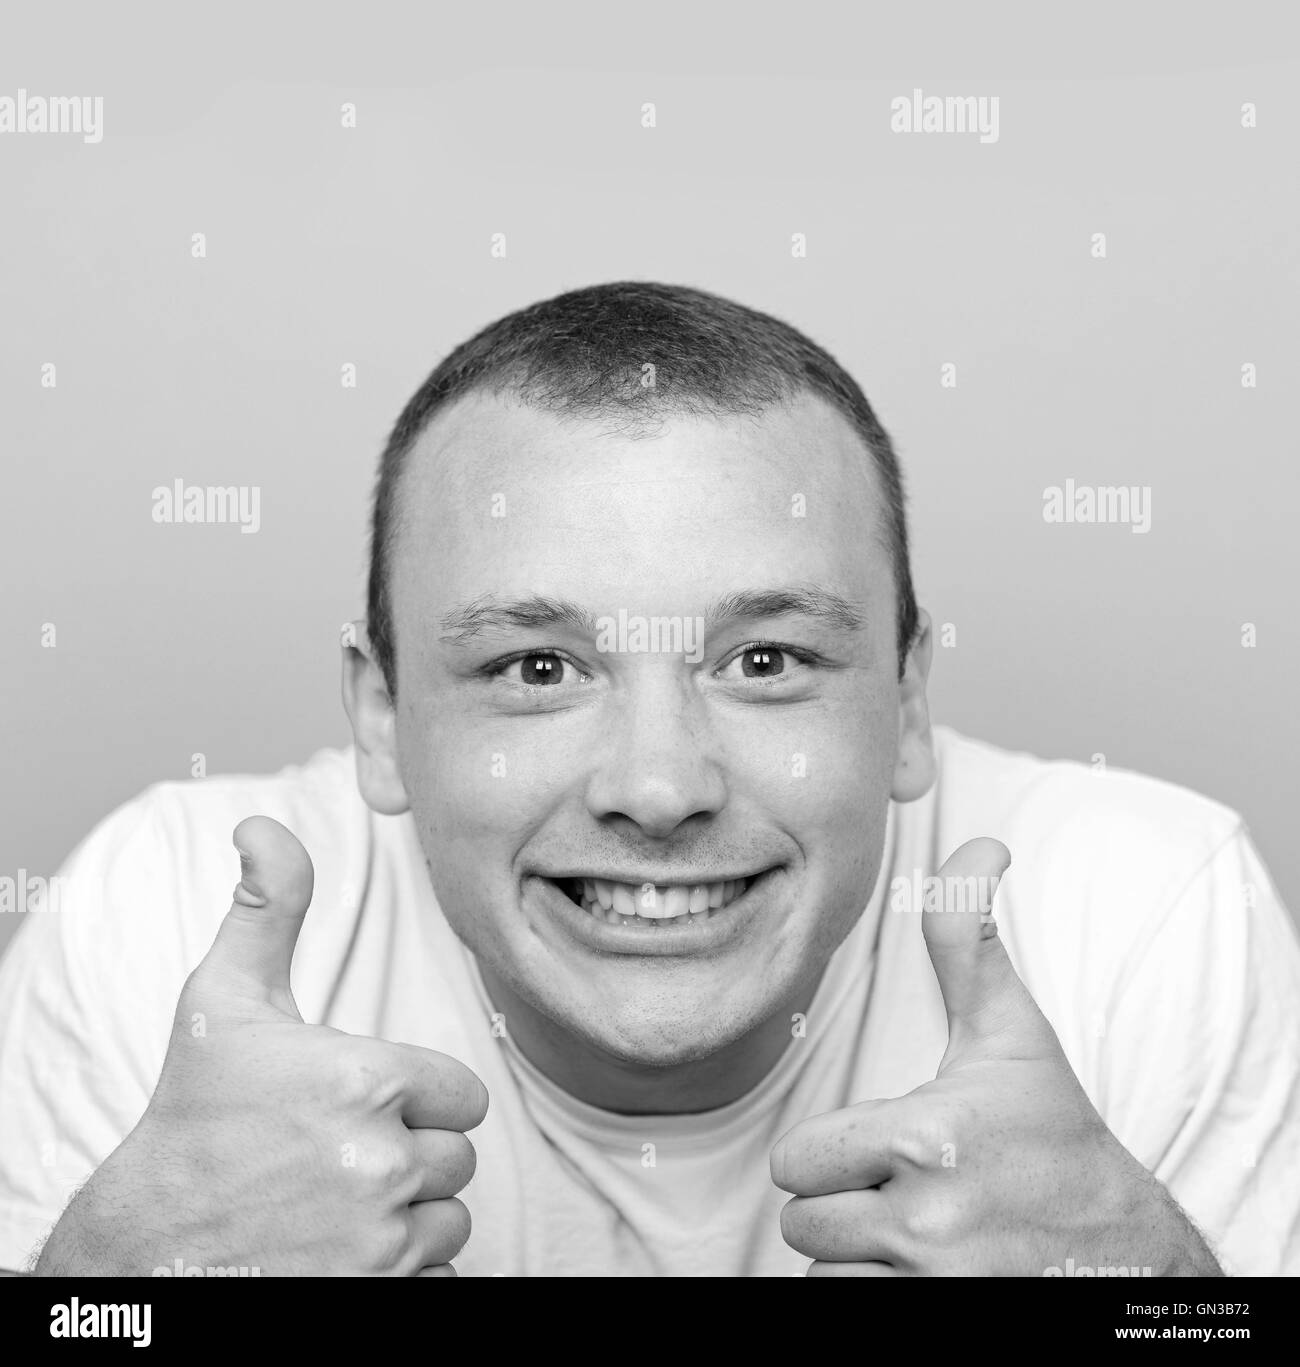 Portrait of with funny expression holding thumbs up against green background Stock Photo